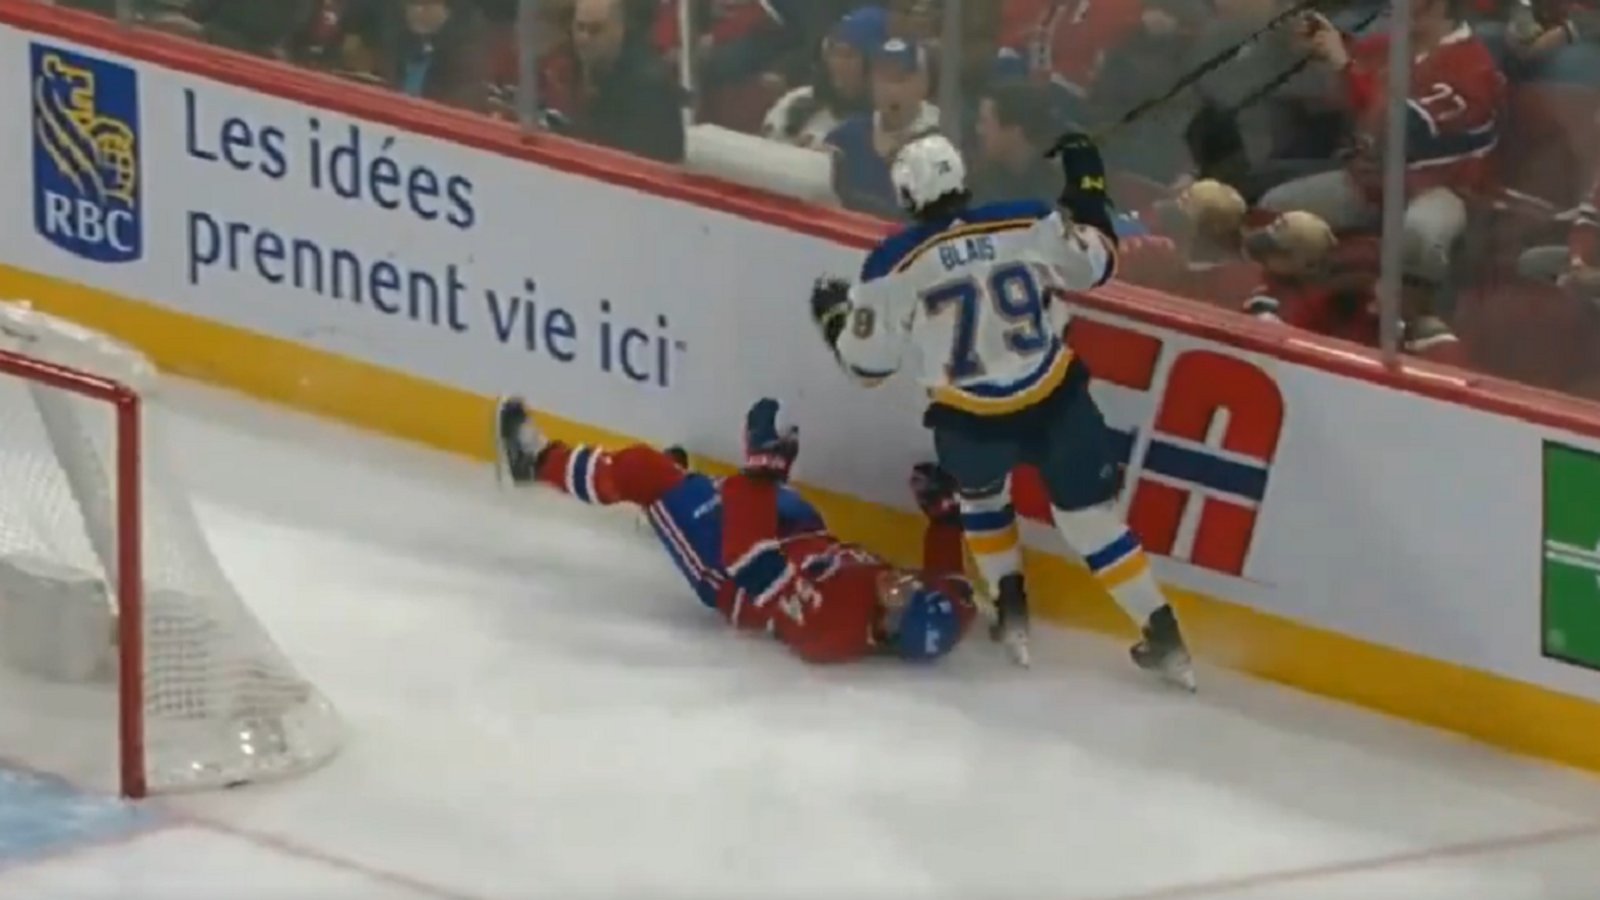 Harris hurt bad after Blais nearly takes his head off.